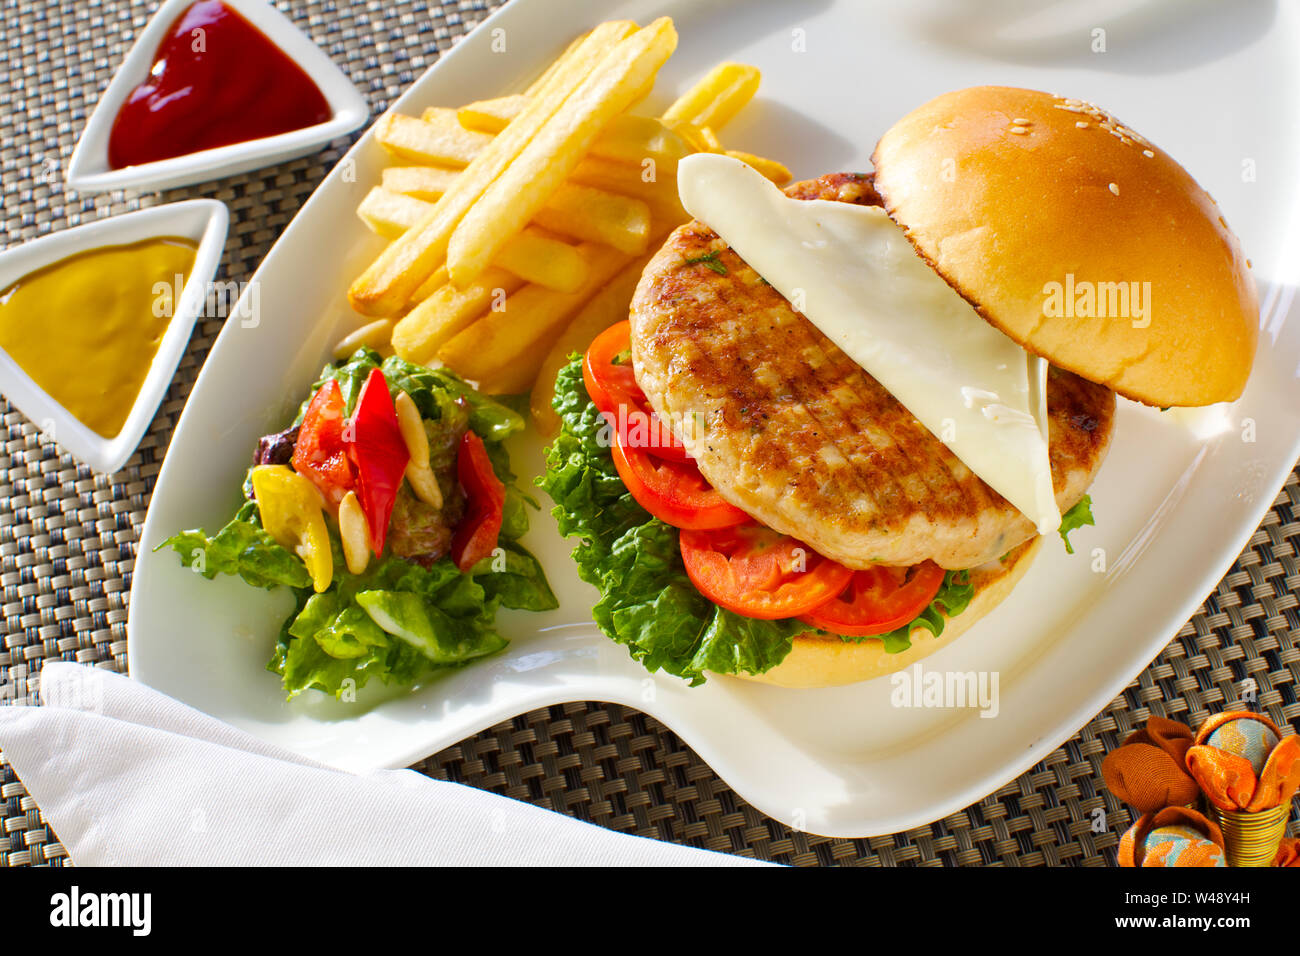 Burger served with french fries and sauces Stock Photo